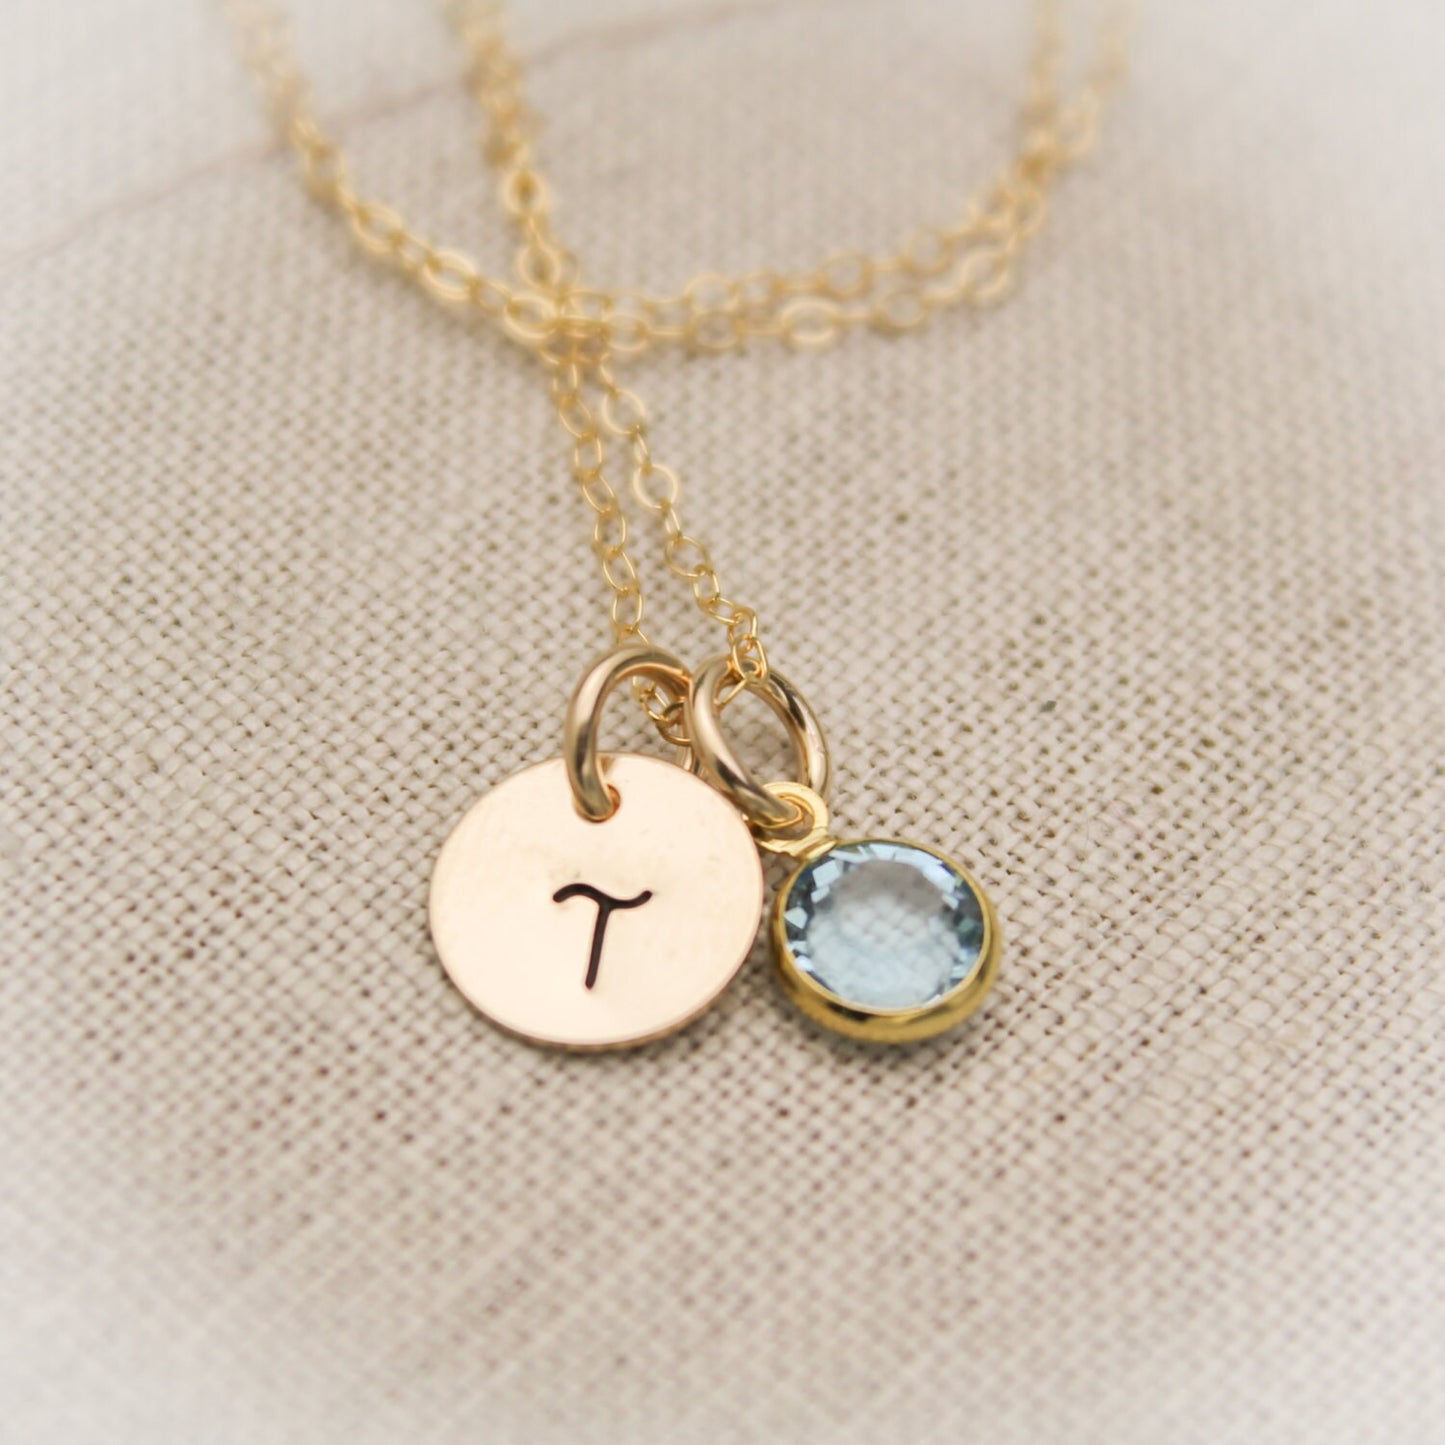 14K Gold Filled Initial Monogram Necklace with Birthstone Charm  Personalized Hand Stamped Jewelry